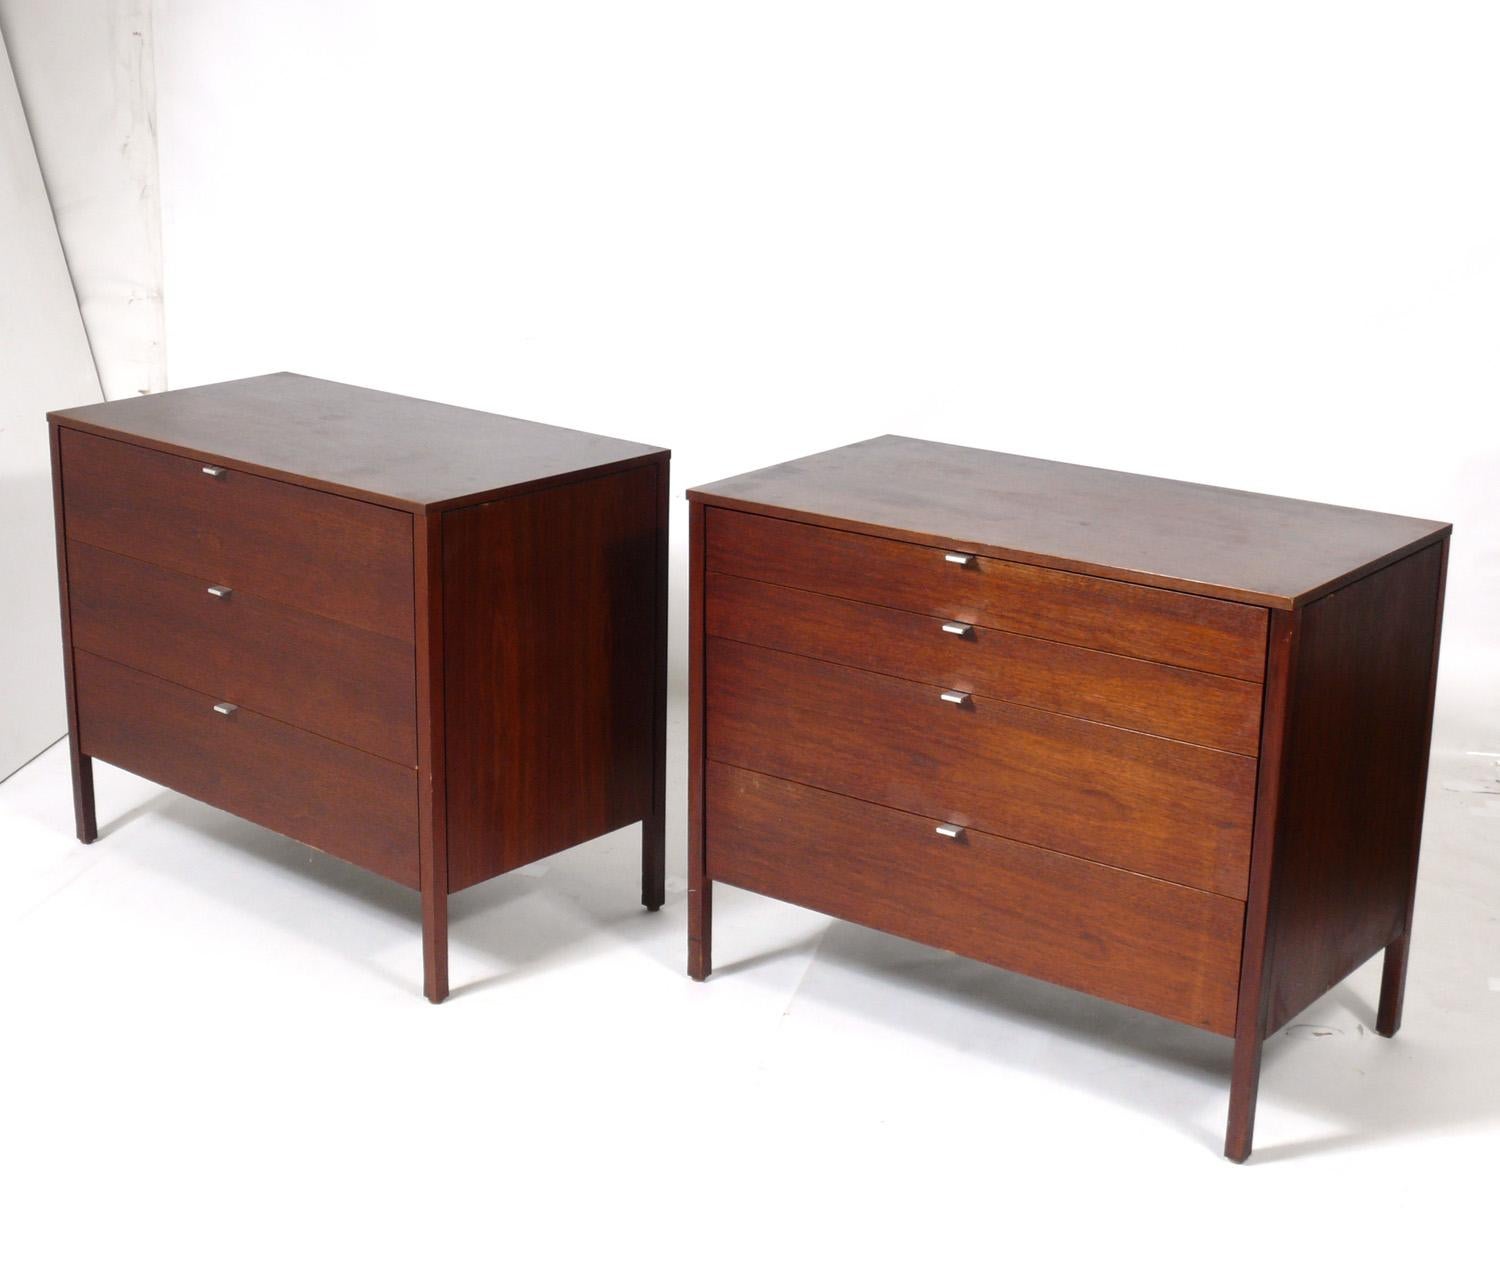 Clean lined mid century walnut chests, designed by Florence Knoll for Knoll, circa 1950s. They offer a voluminous amount of storage with four deep drawers in each chest. They are priced at $3500 each or $6000 for the pair.